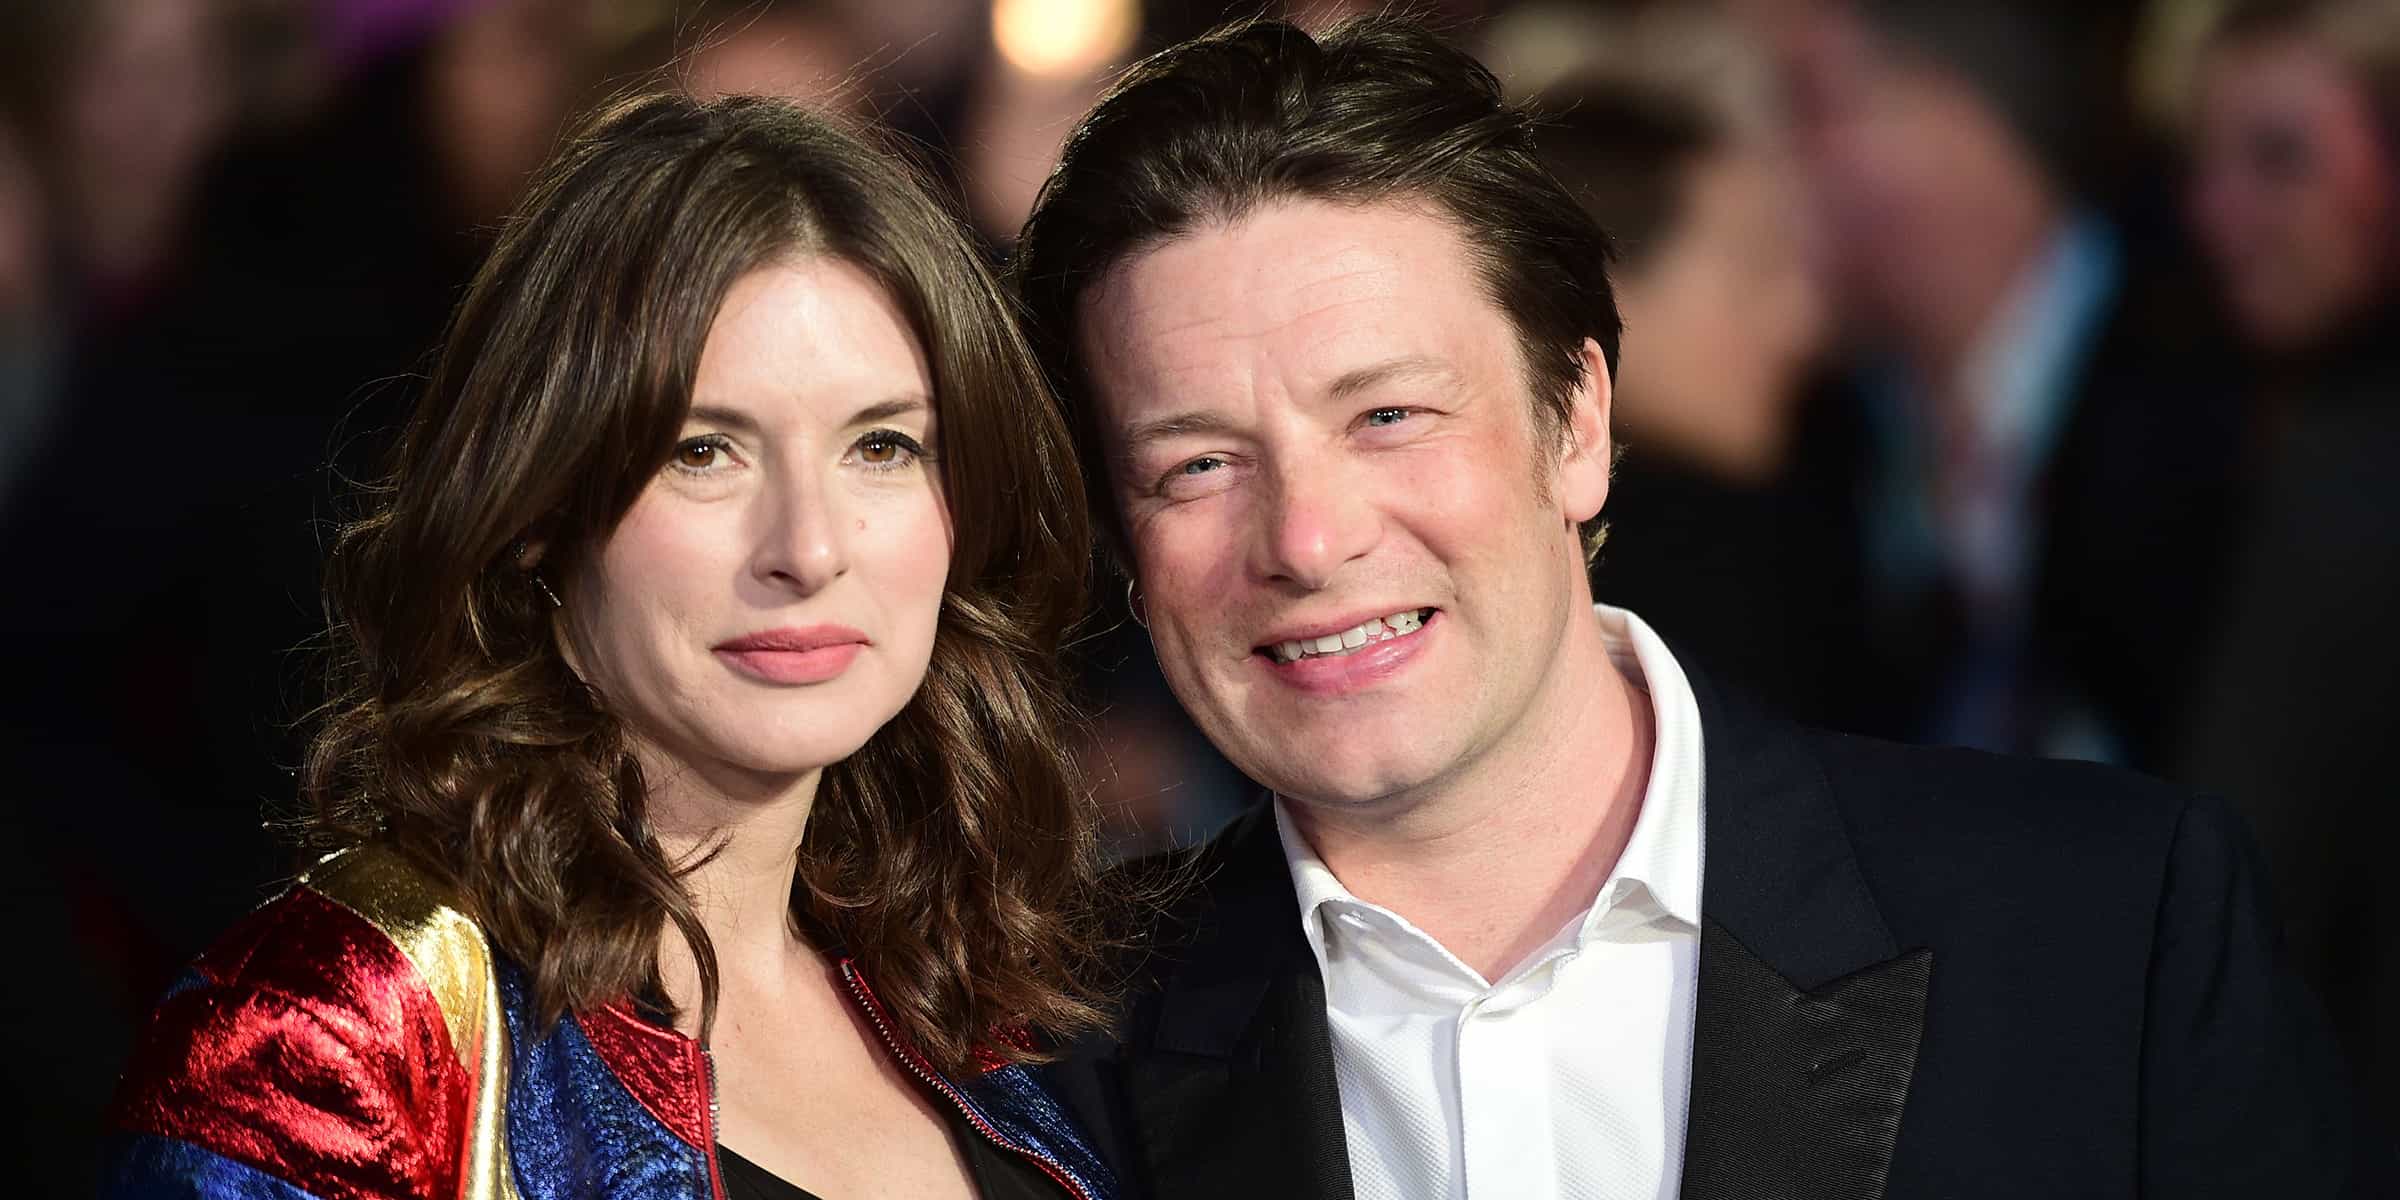 British chef Jamie Oliver (R) and his wife Juliette (Credits: Getty Images)